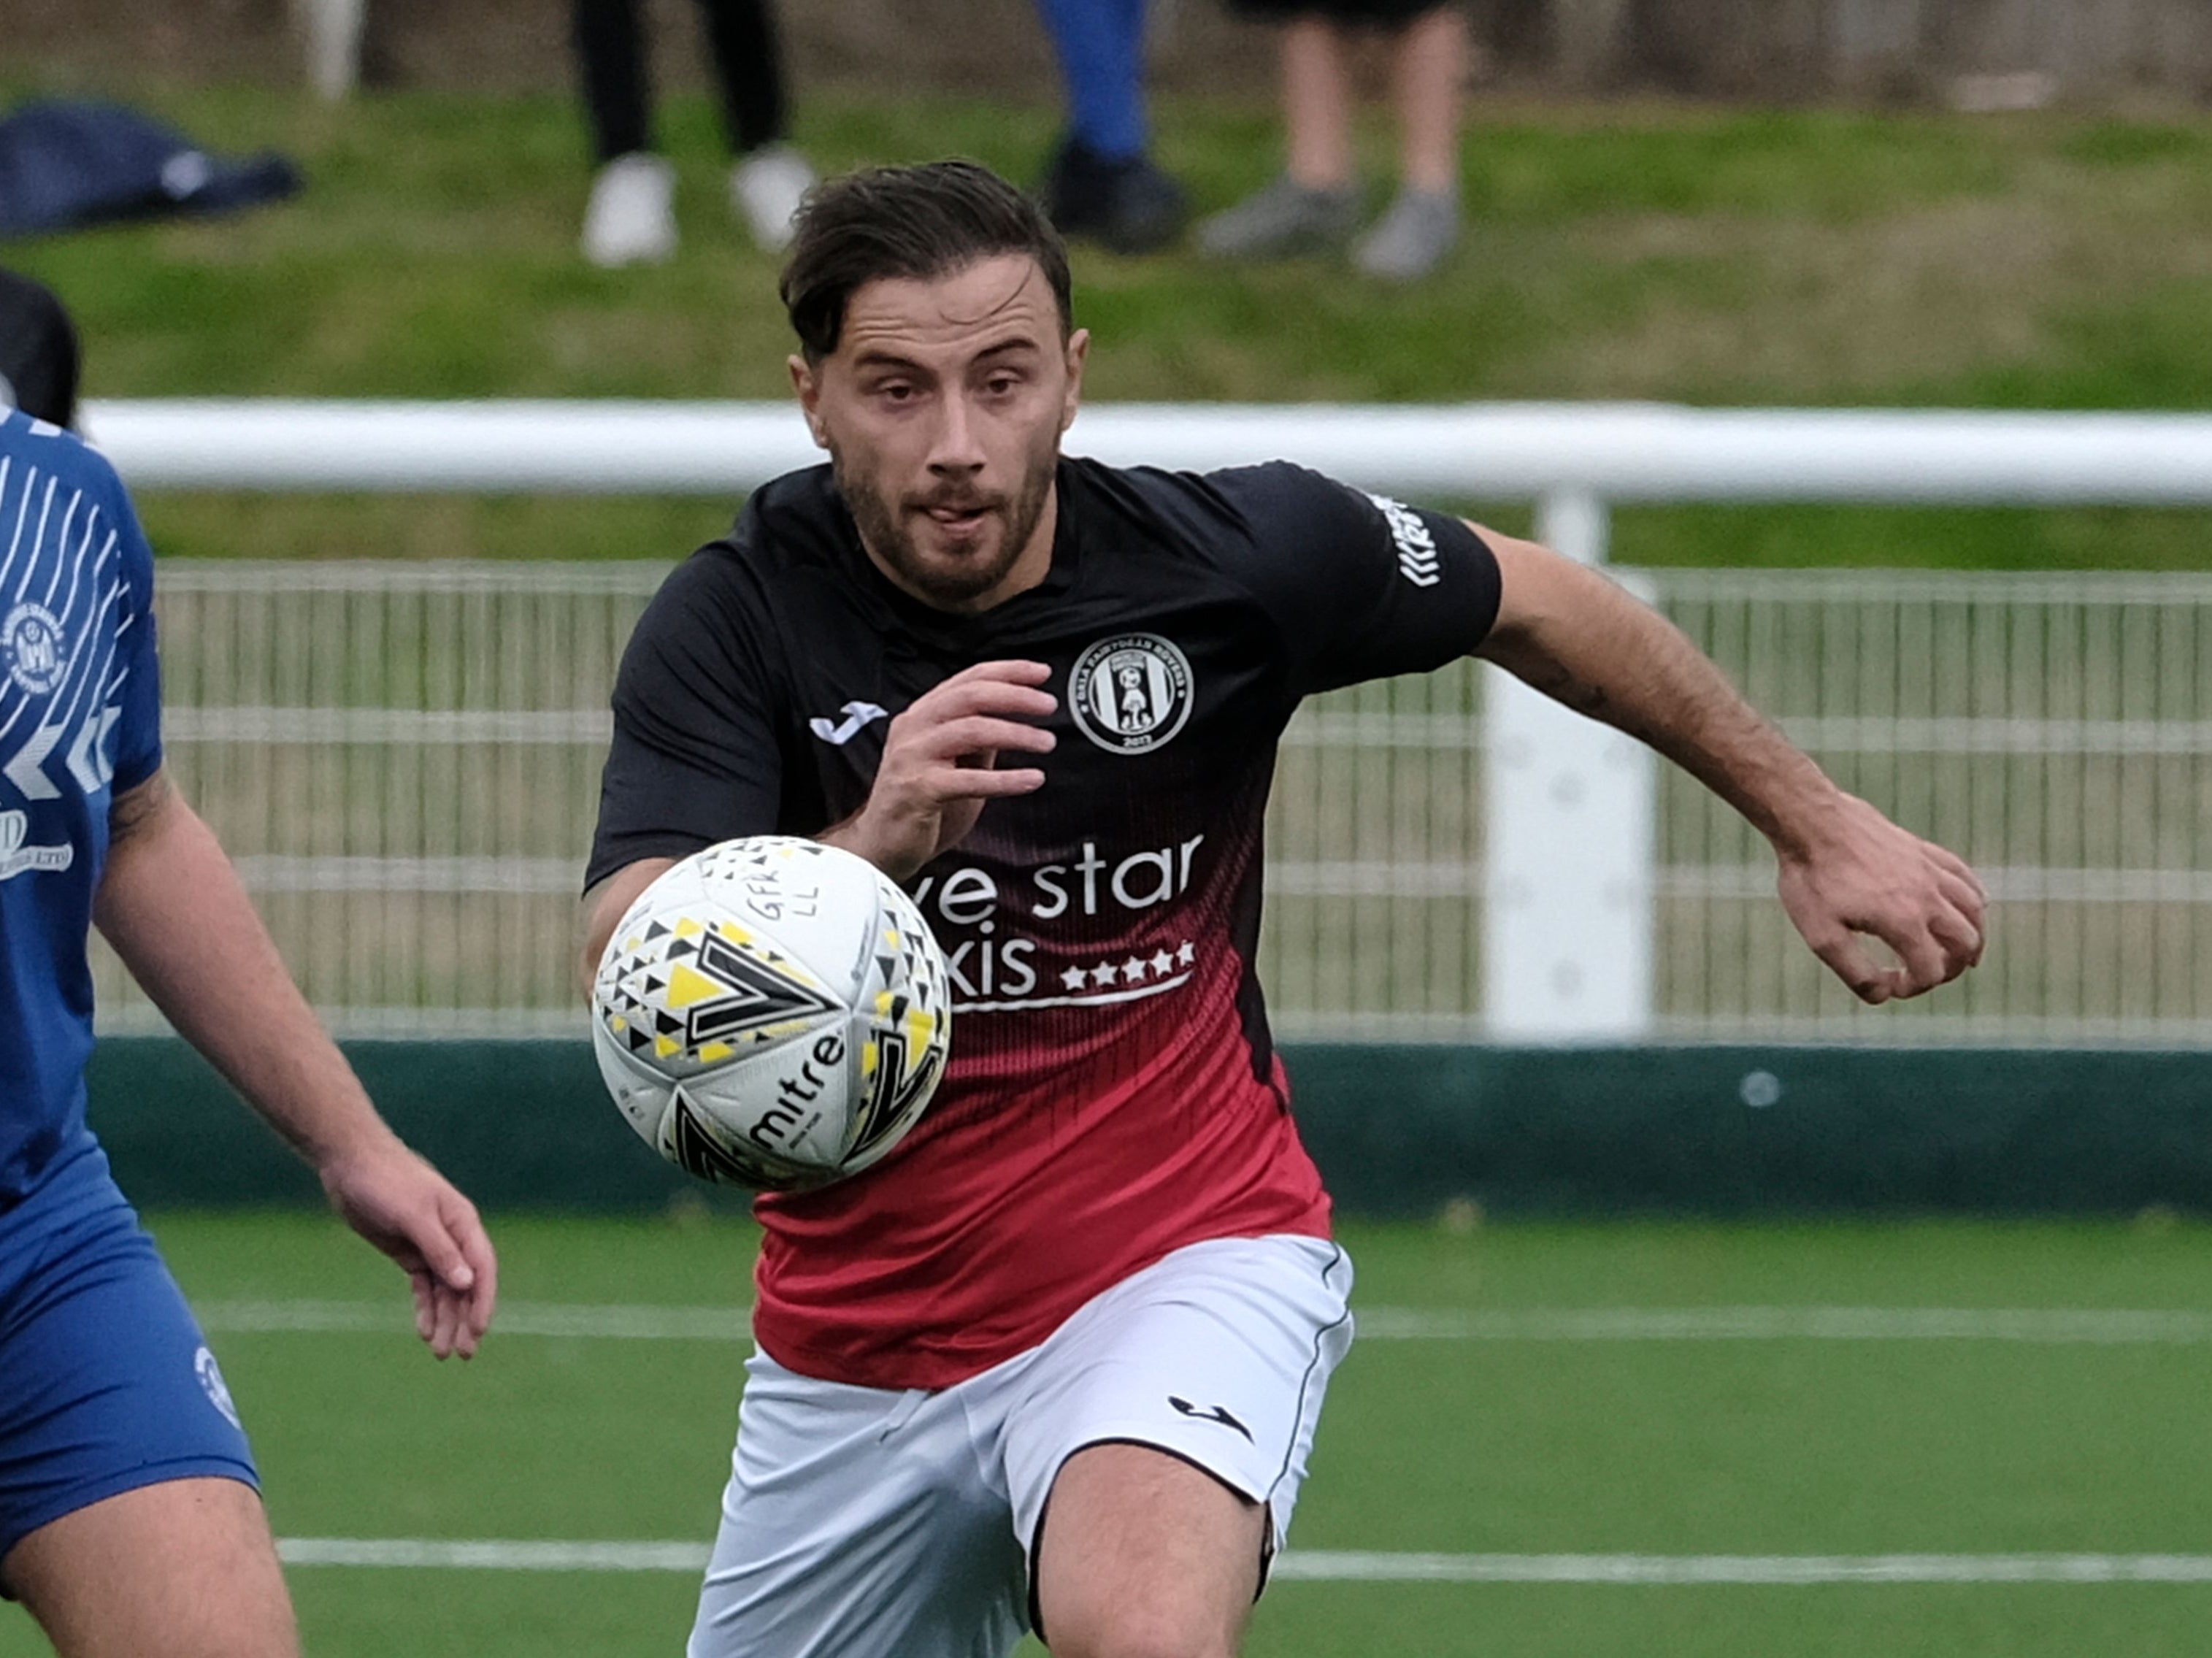 The Gala Fairydean Rovers striker is the first senior Scottish footballer to come out